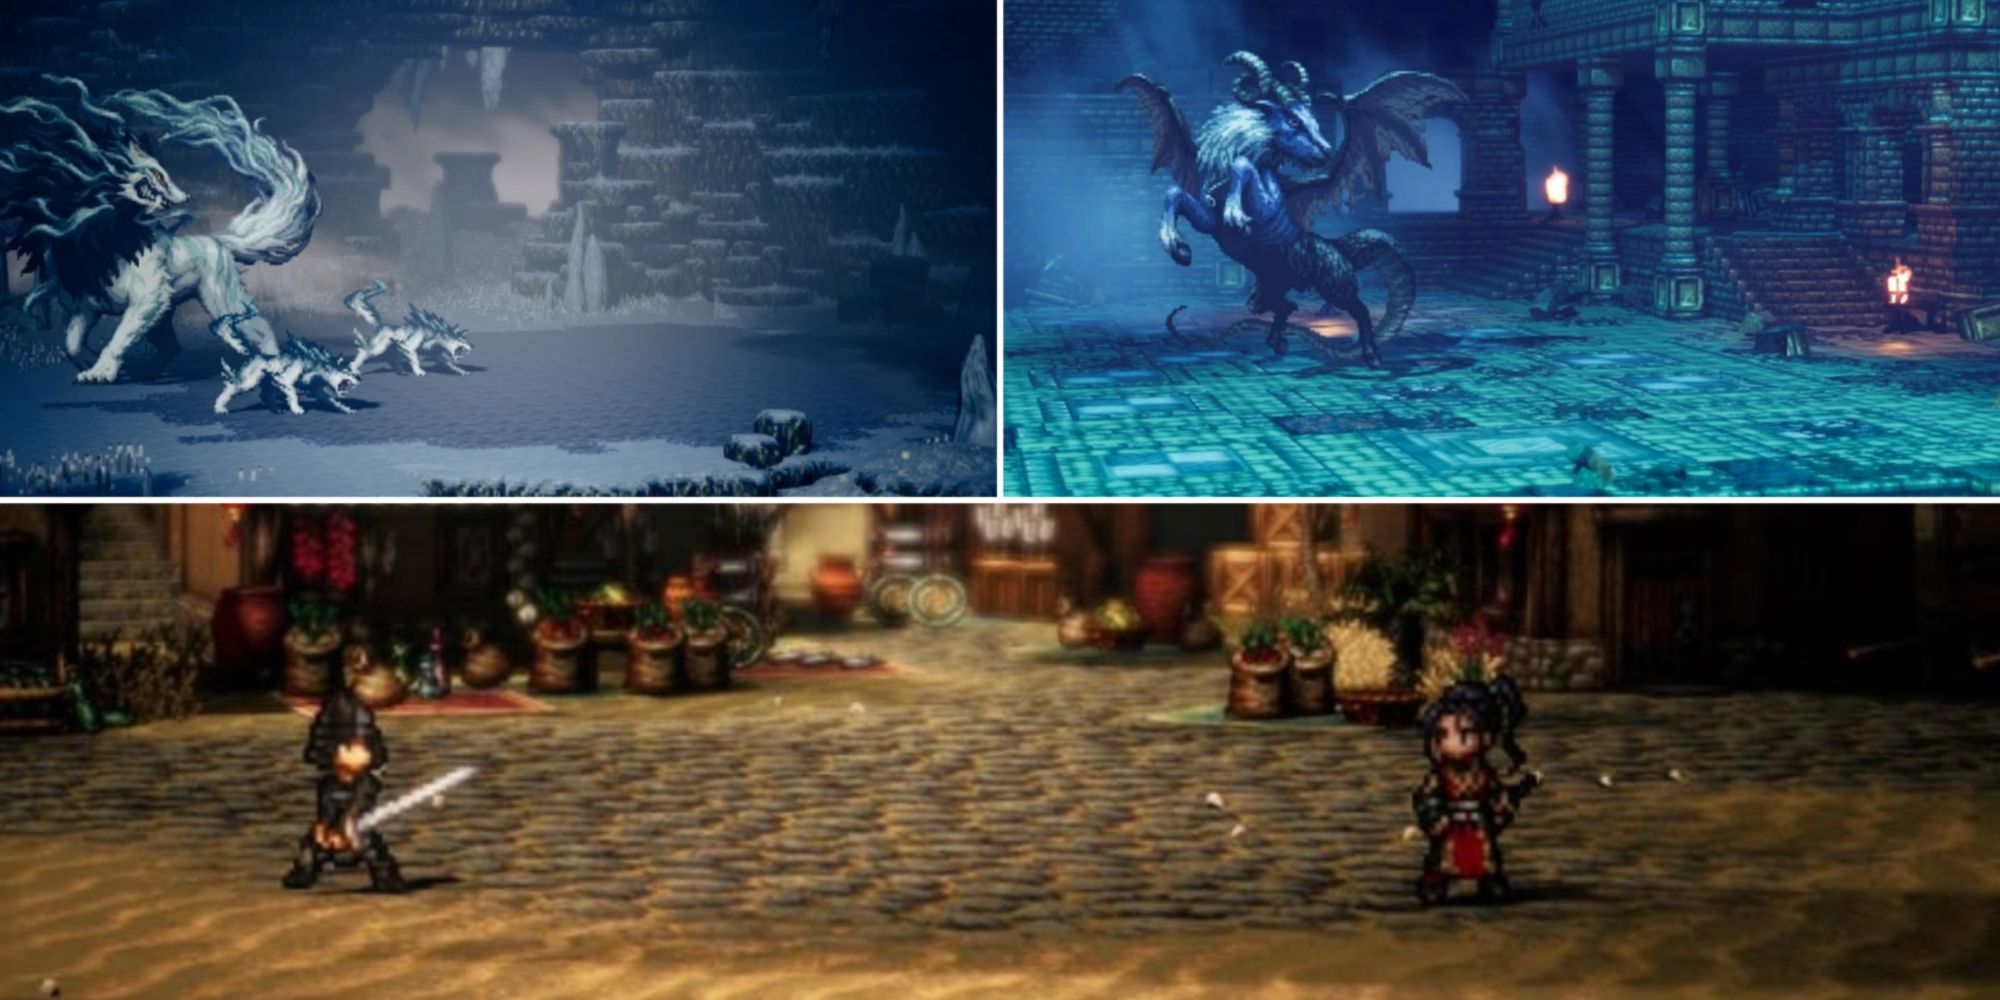 How To Obtain All Legendary Arms In Octopath Traveler 2